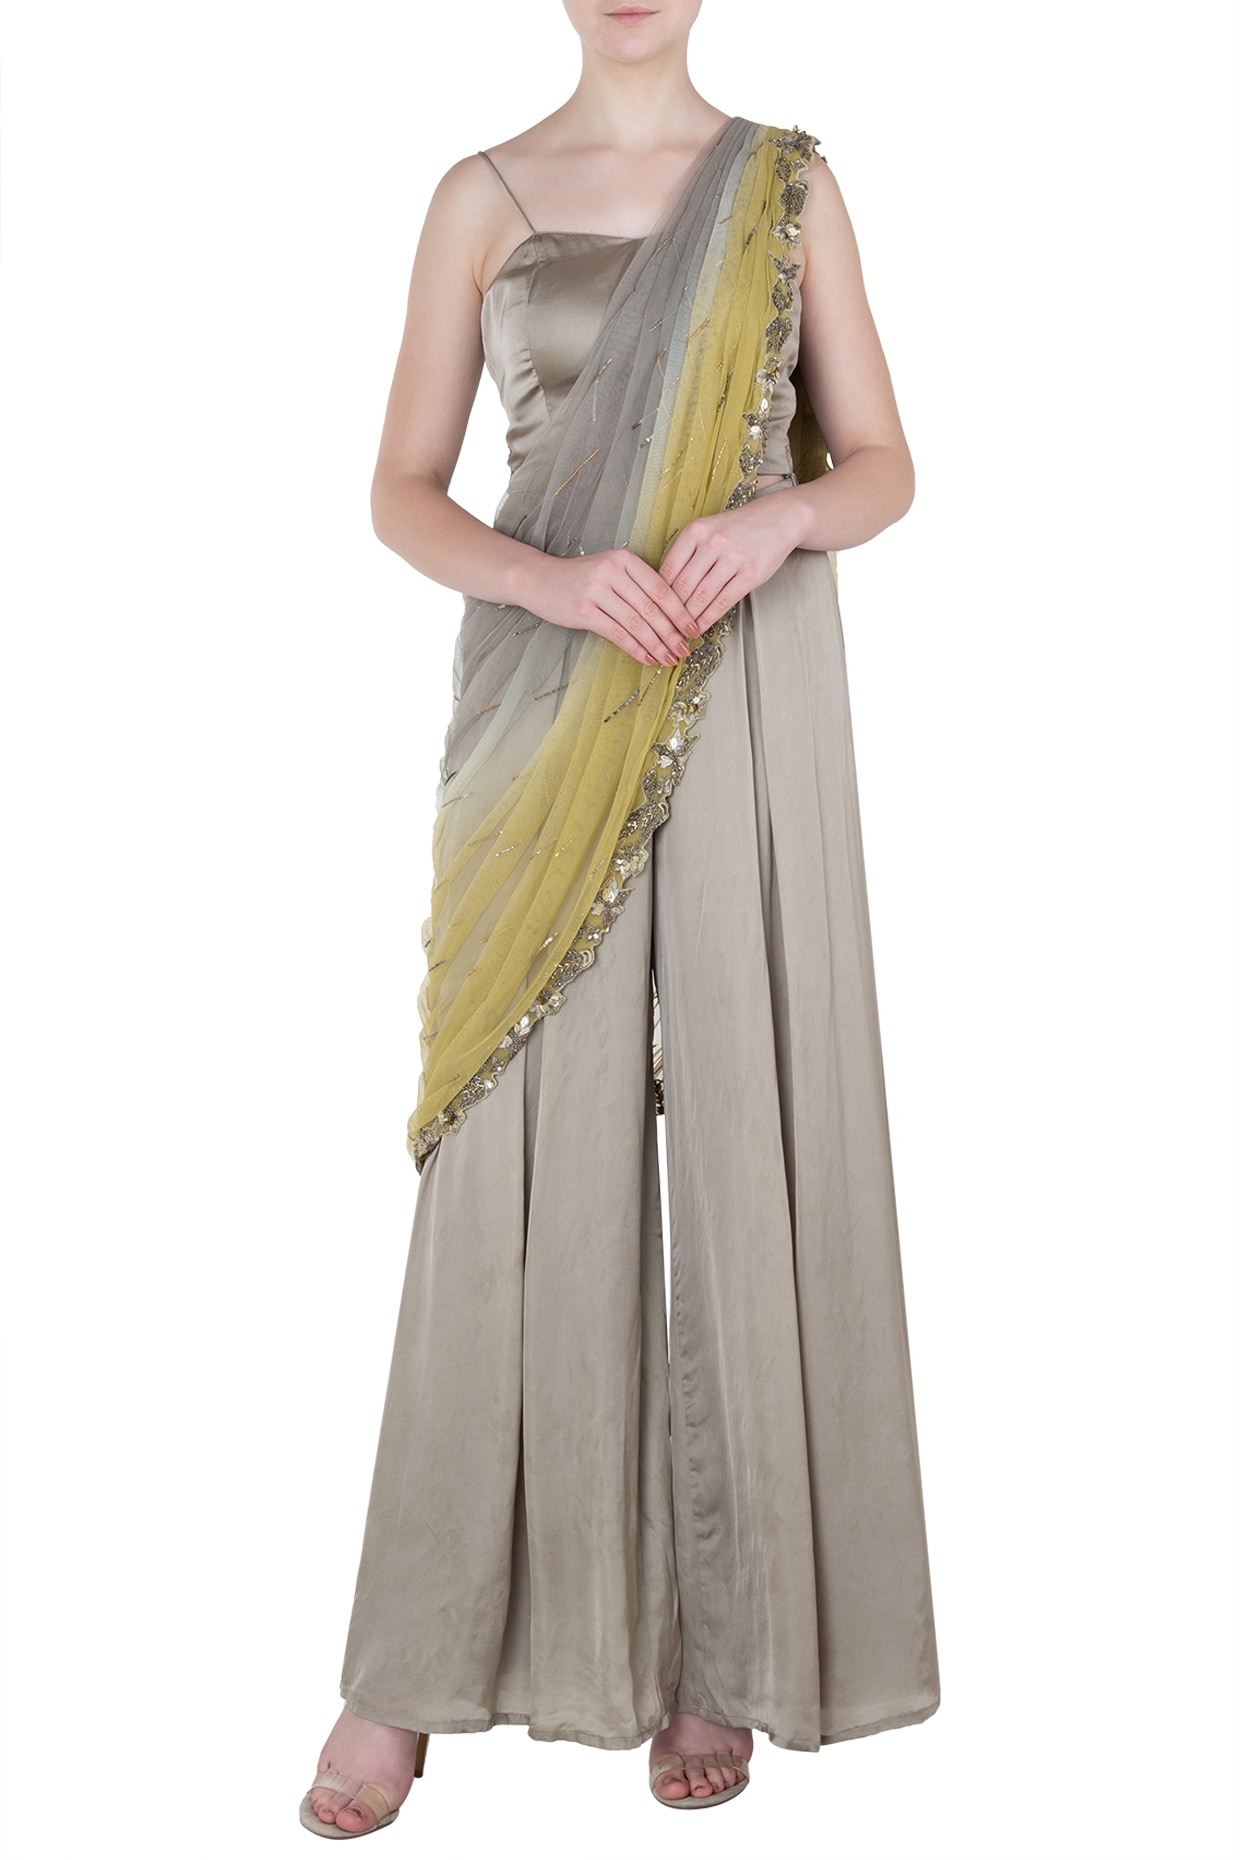 Women's Stripped Pant With Attached Dupatta And Top Set - Label Shaurya  Sanadhya | Stripped pants, Fashion pants, Women